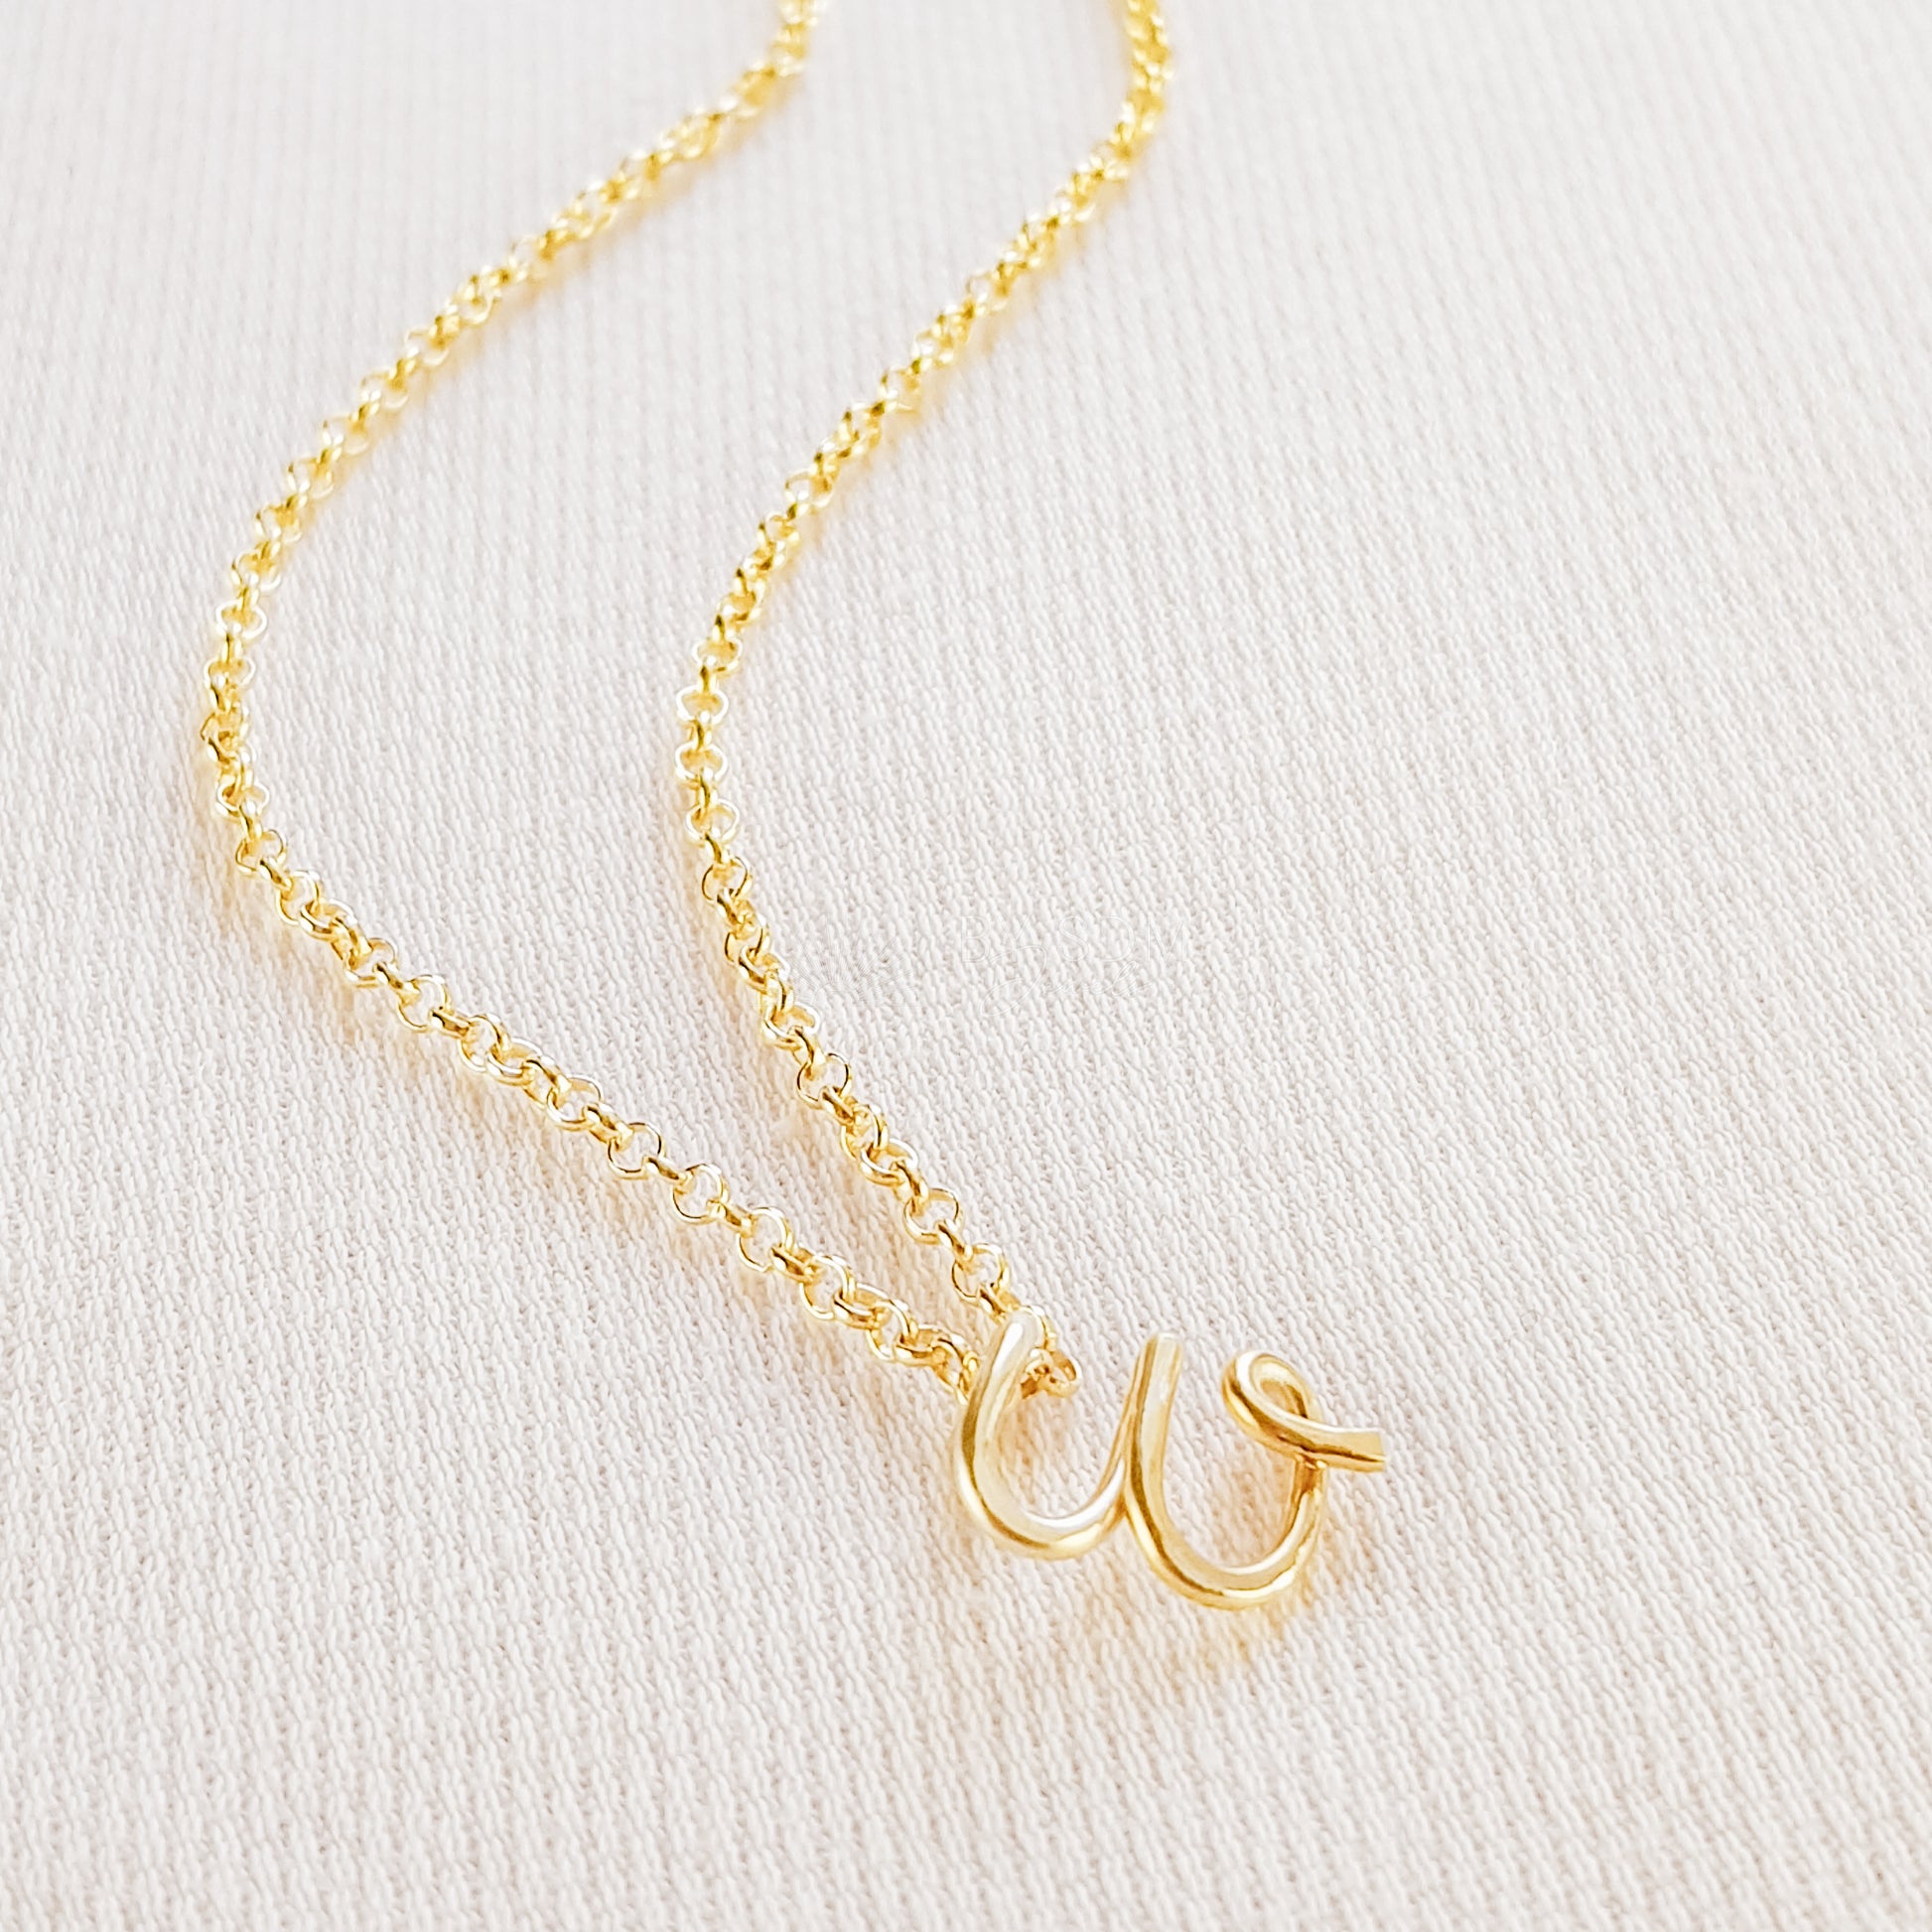 T Initial Necklace • Personalized Name Necklace • Letter Necklace • Gold Necklace • Wife Gifts • Gifts For Mom • Moms Gift • Birthday Gift